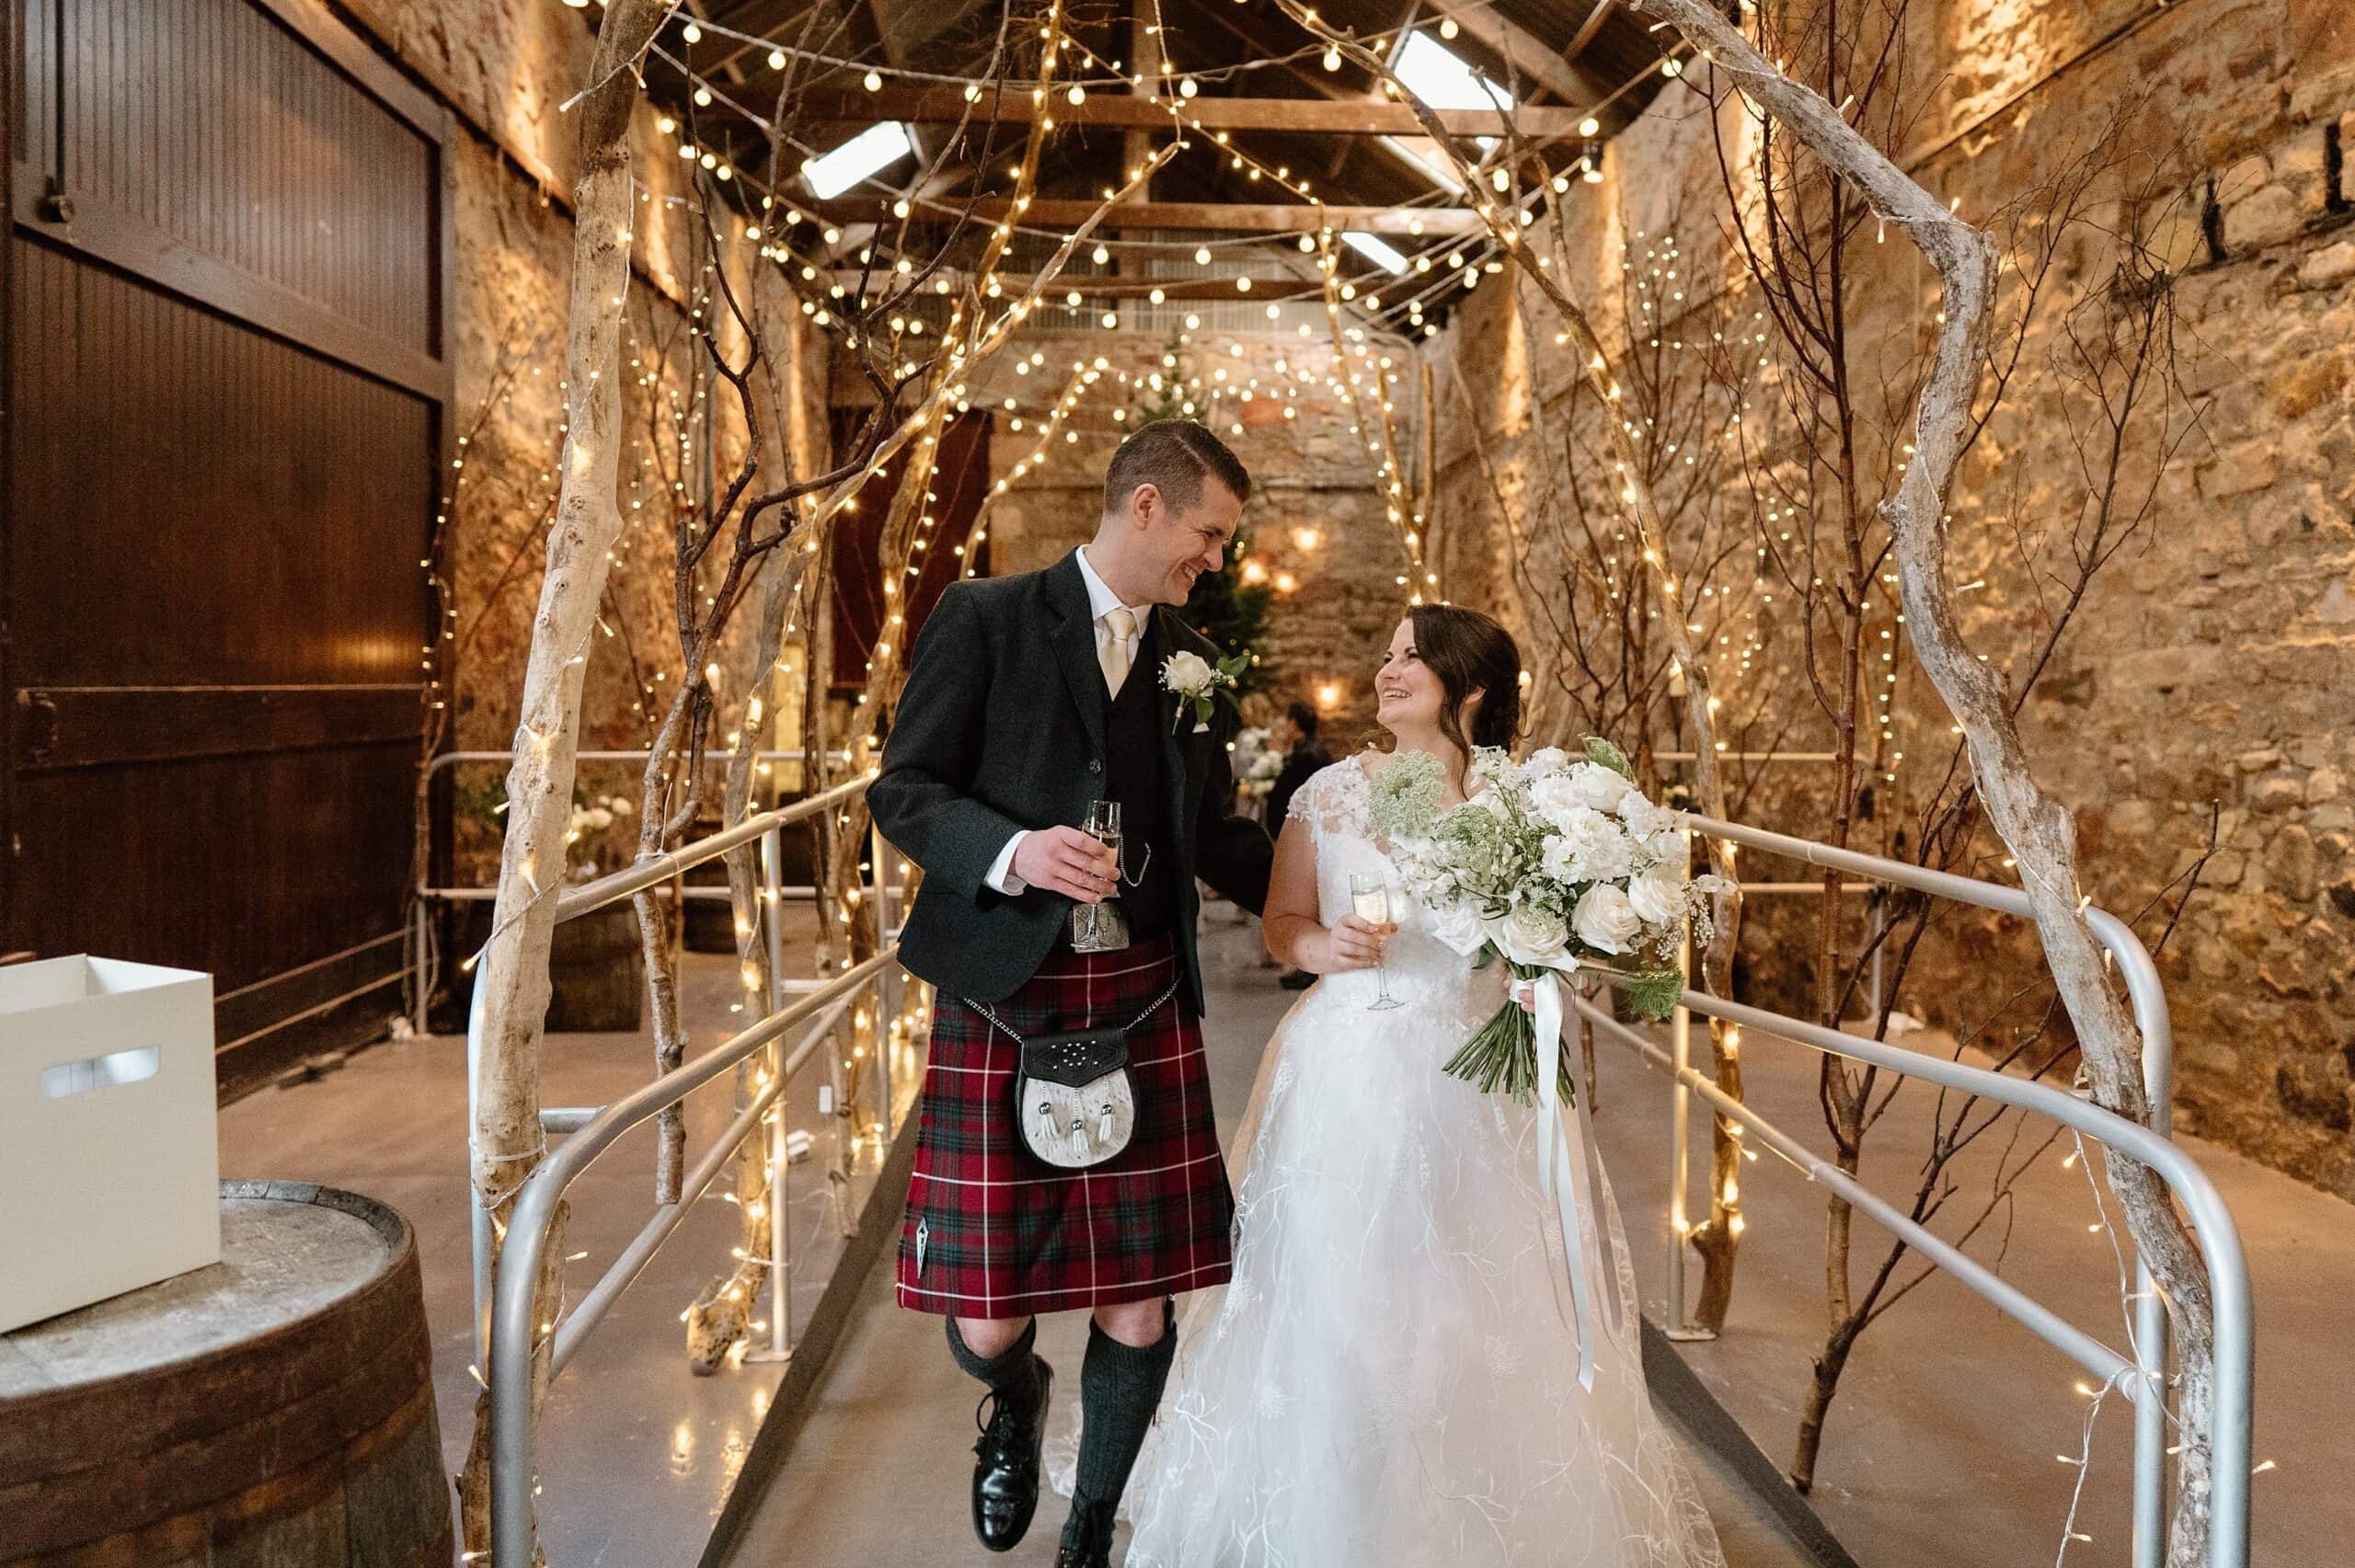 kinkell byre wedding photos interior inside view of farm barn wedding venue st andrews scotland ceremony setup with fairy lights with bride and groom